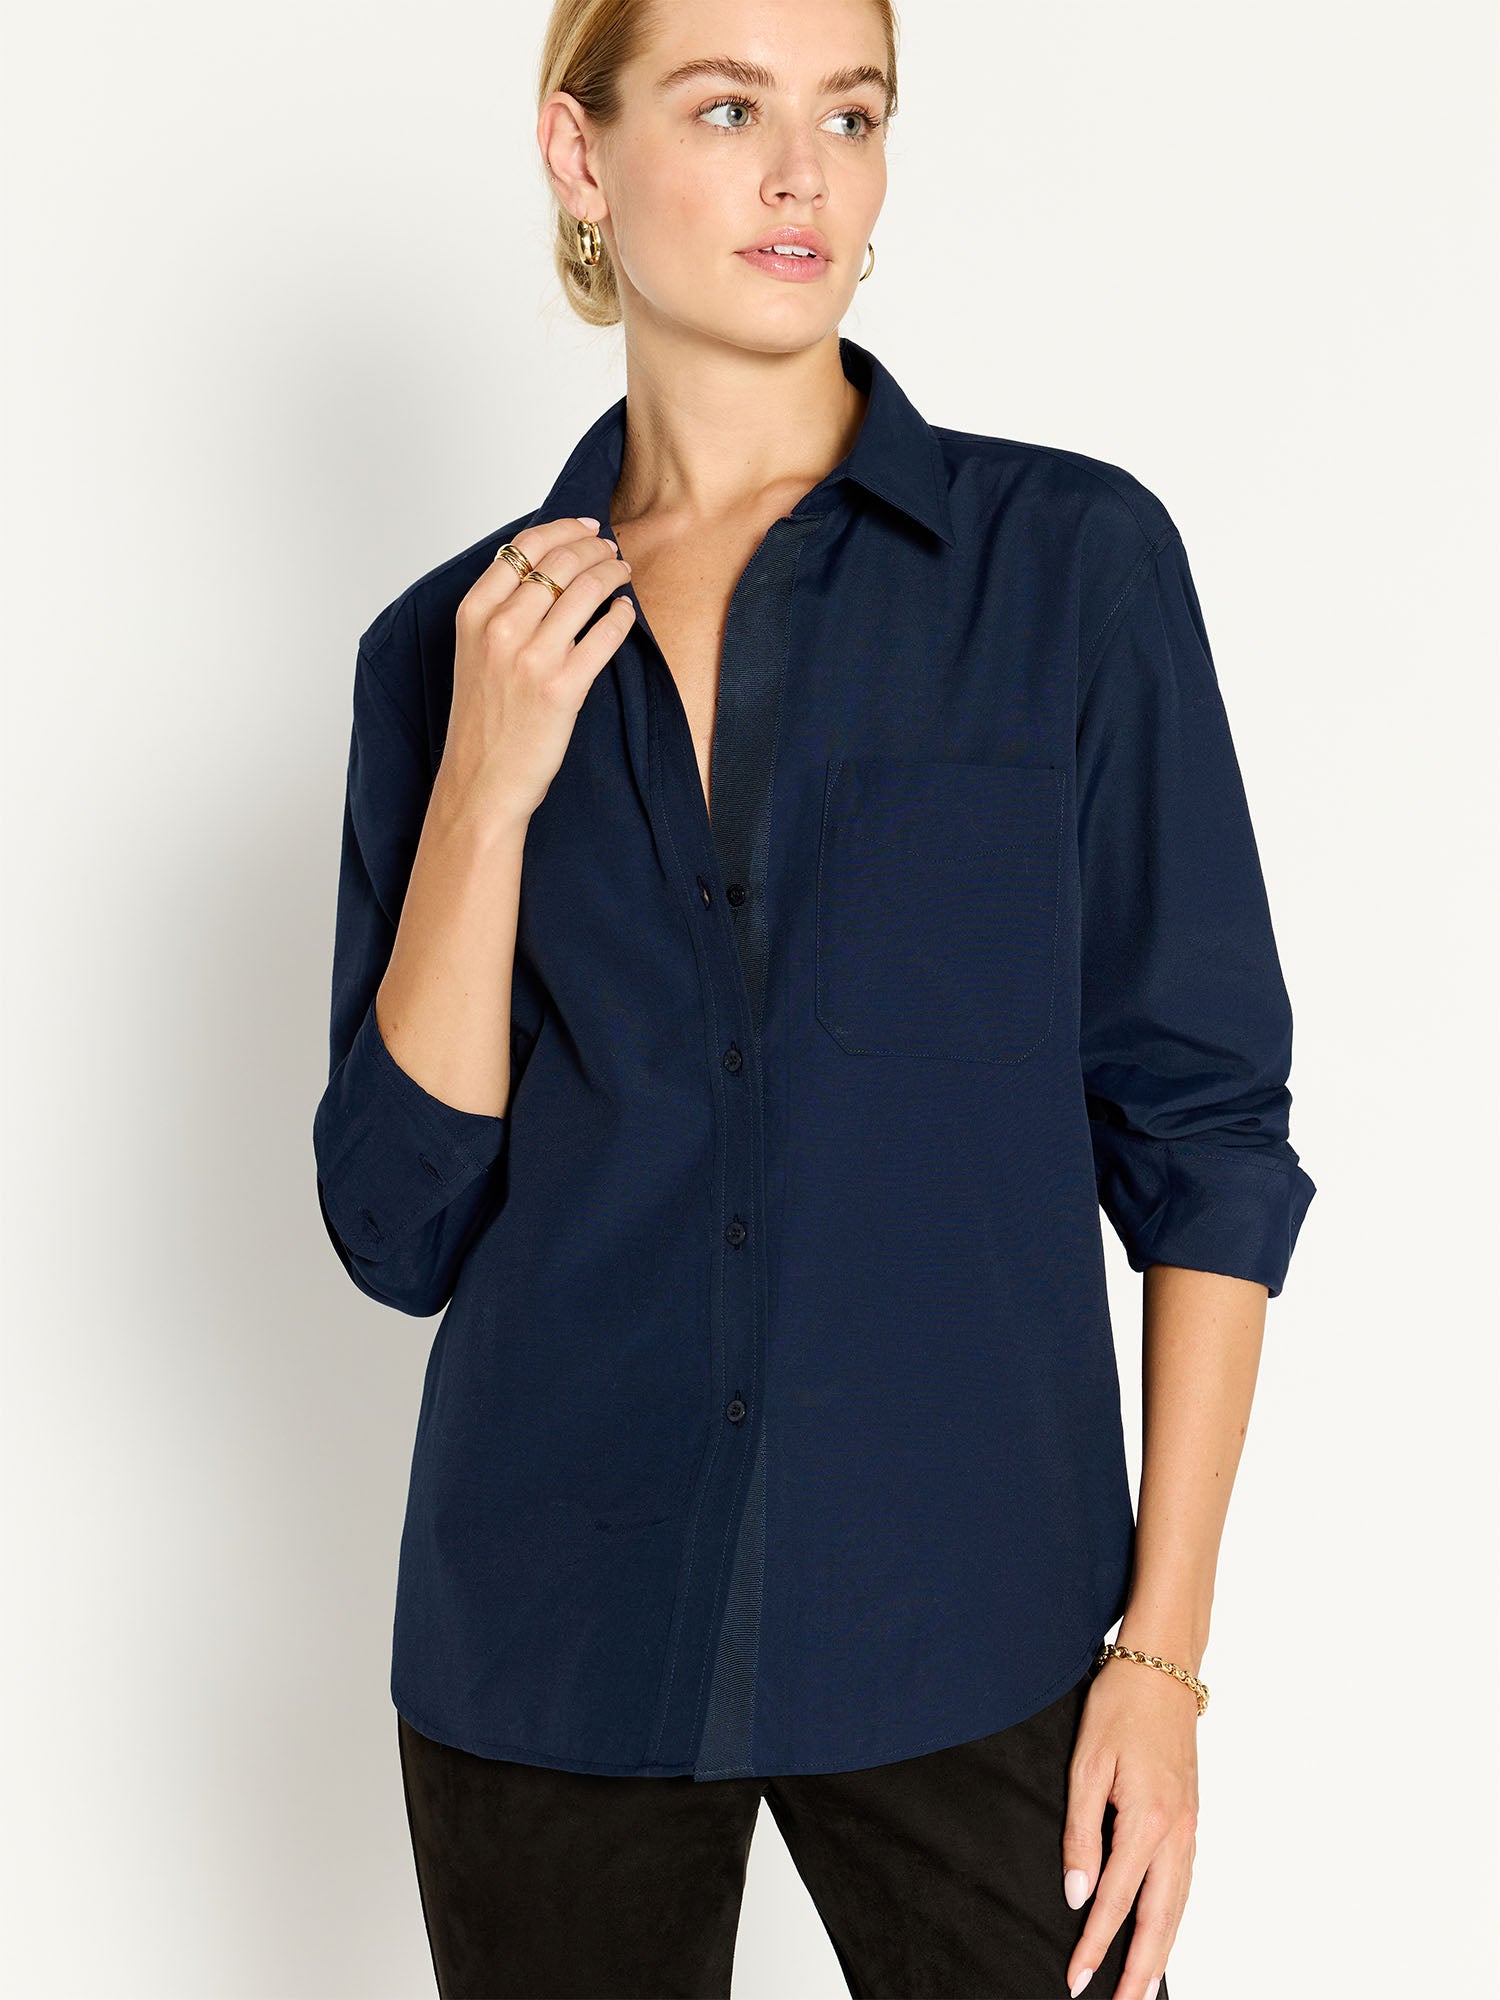 Everyday button up navy shirt front view 2